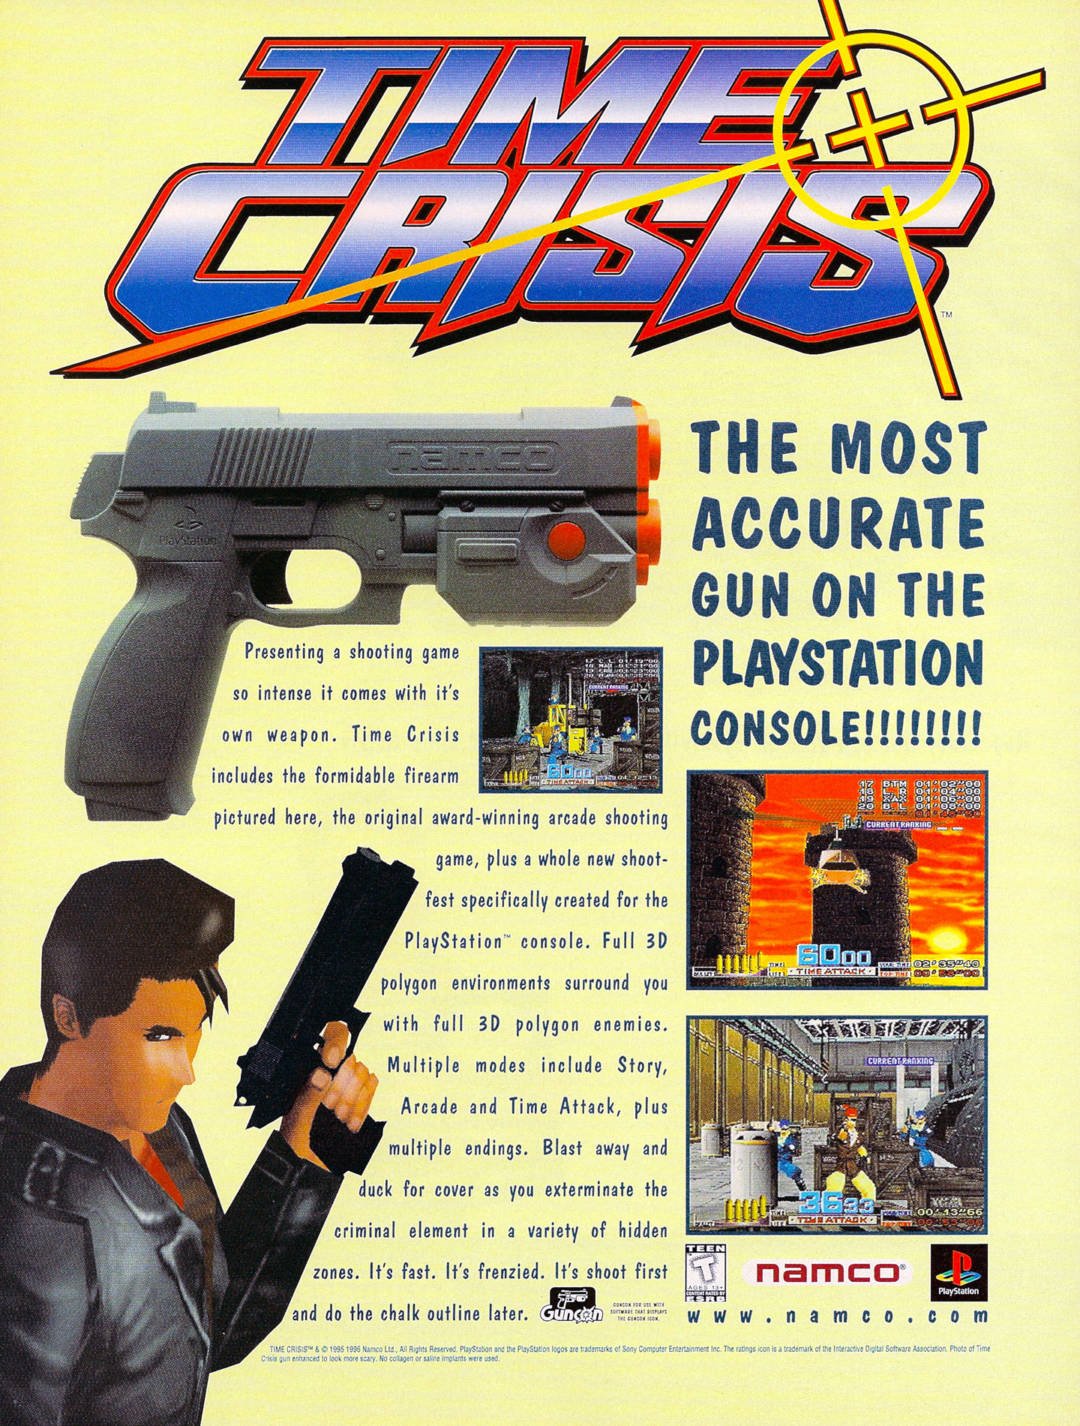 90s video game ads -  time crisis advert - Time Crisis camco Presenting a shooting game so intense it comes with it's own weapon. Time Crisis includes the formidable firearm Deste pictured here, the original awardwinning arcade shooting game, plus a whole